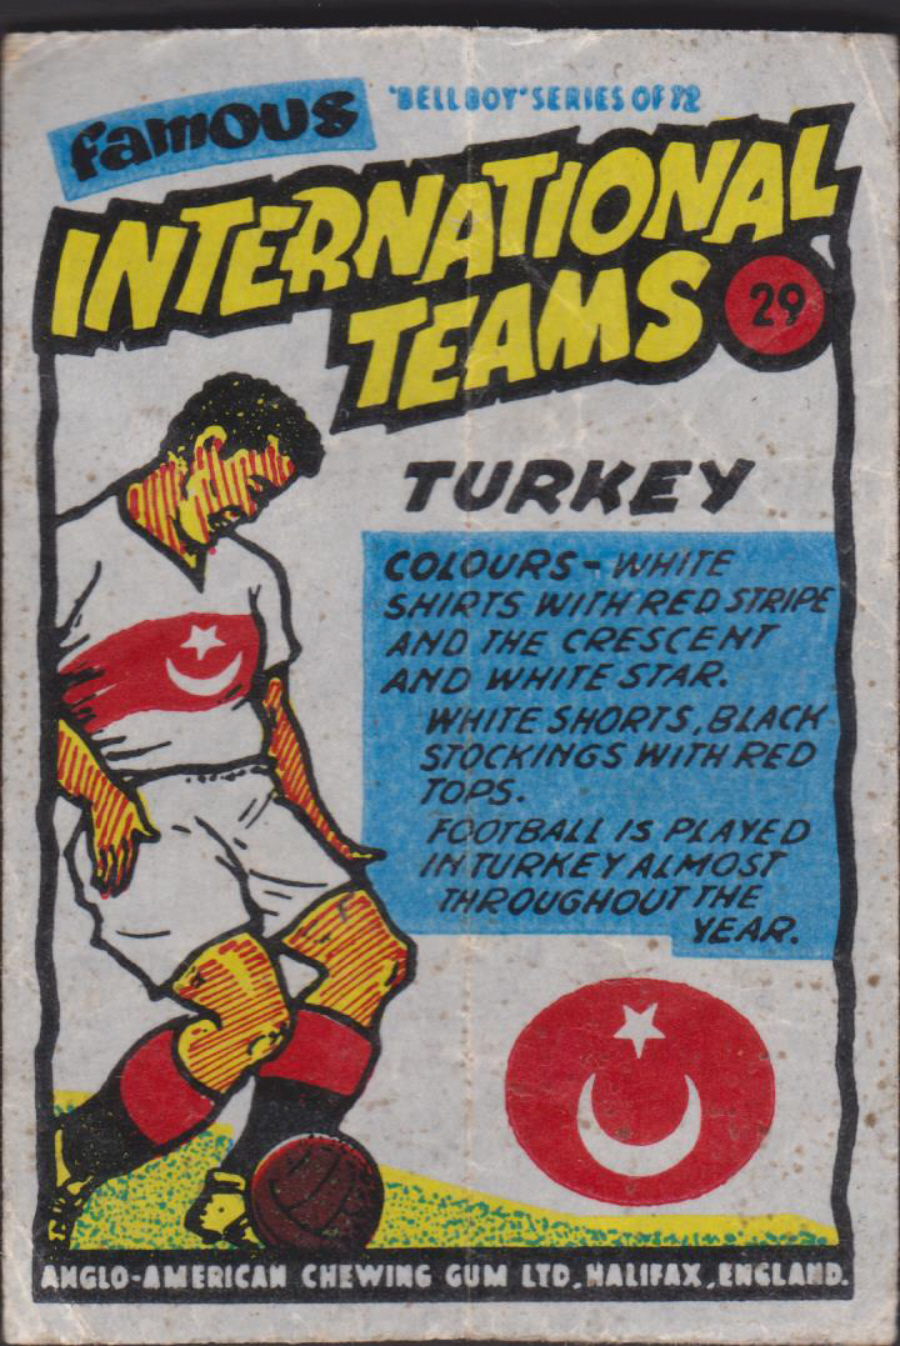 Anglo-American-Chewing-Gum-Wax-Wrapper-Famous International Teams -No-29 -Turkey